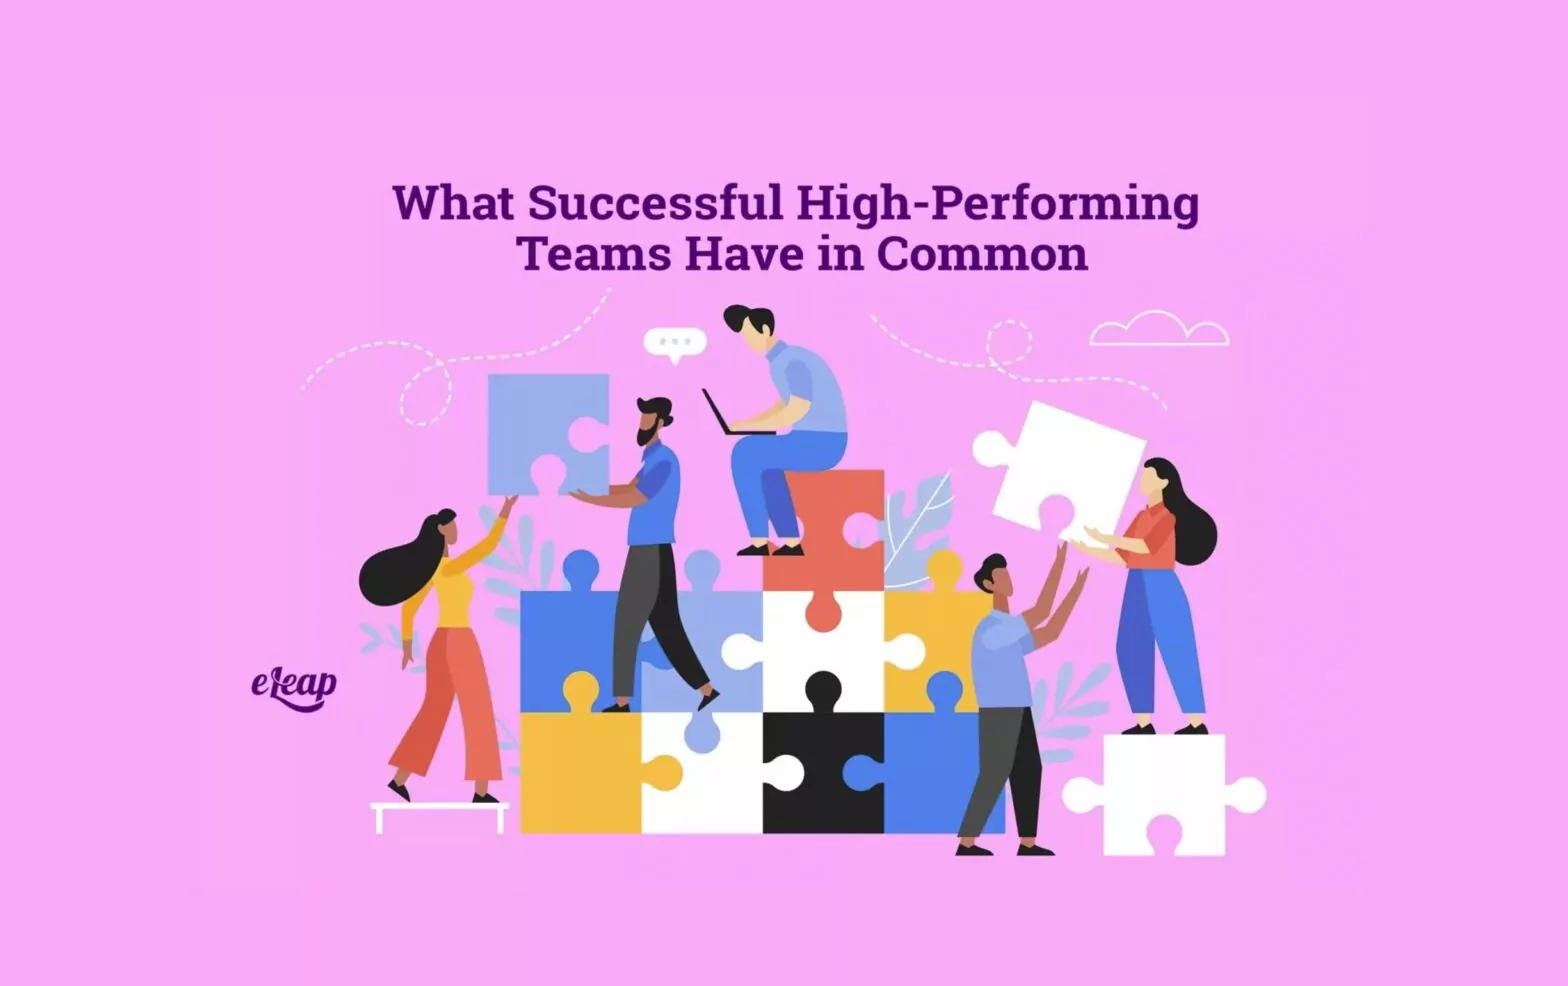 What Successful High-Performing Teams Have in Common